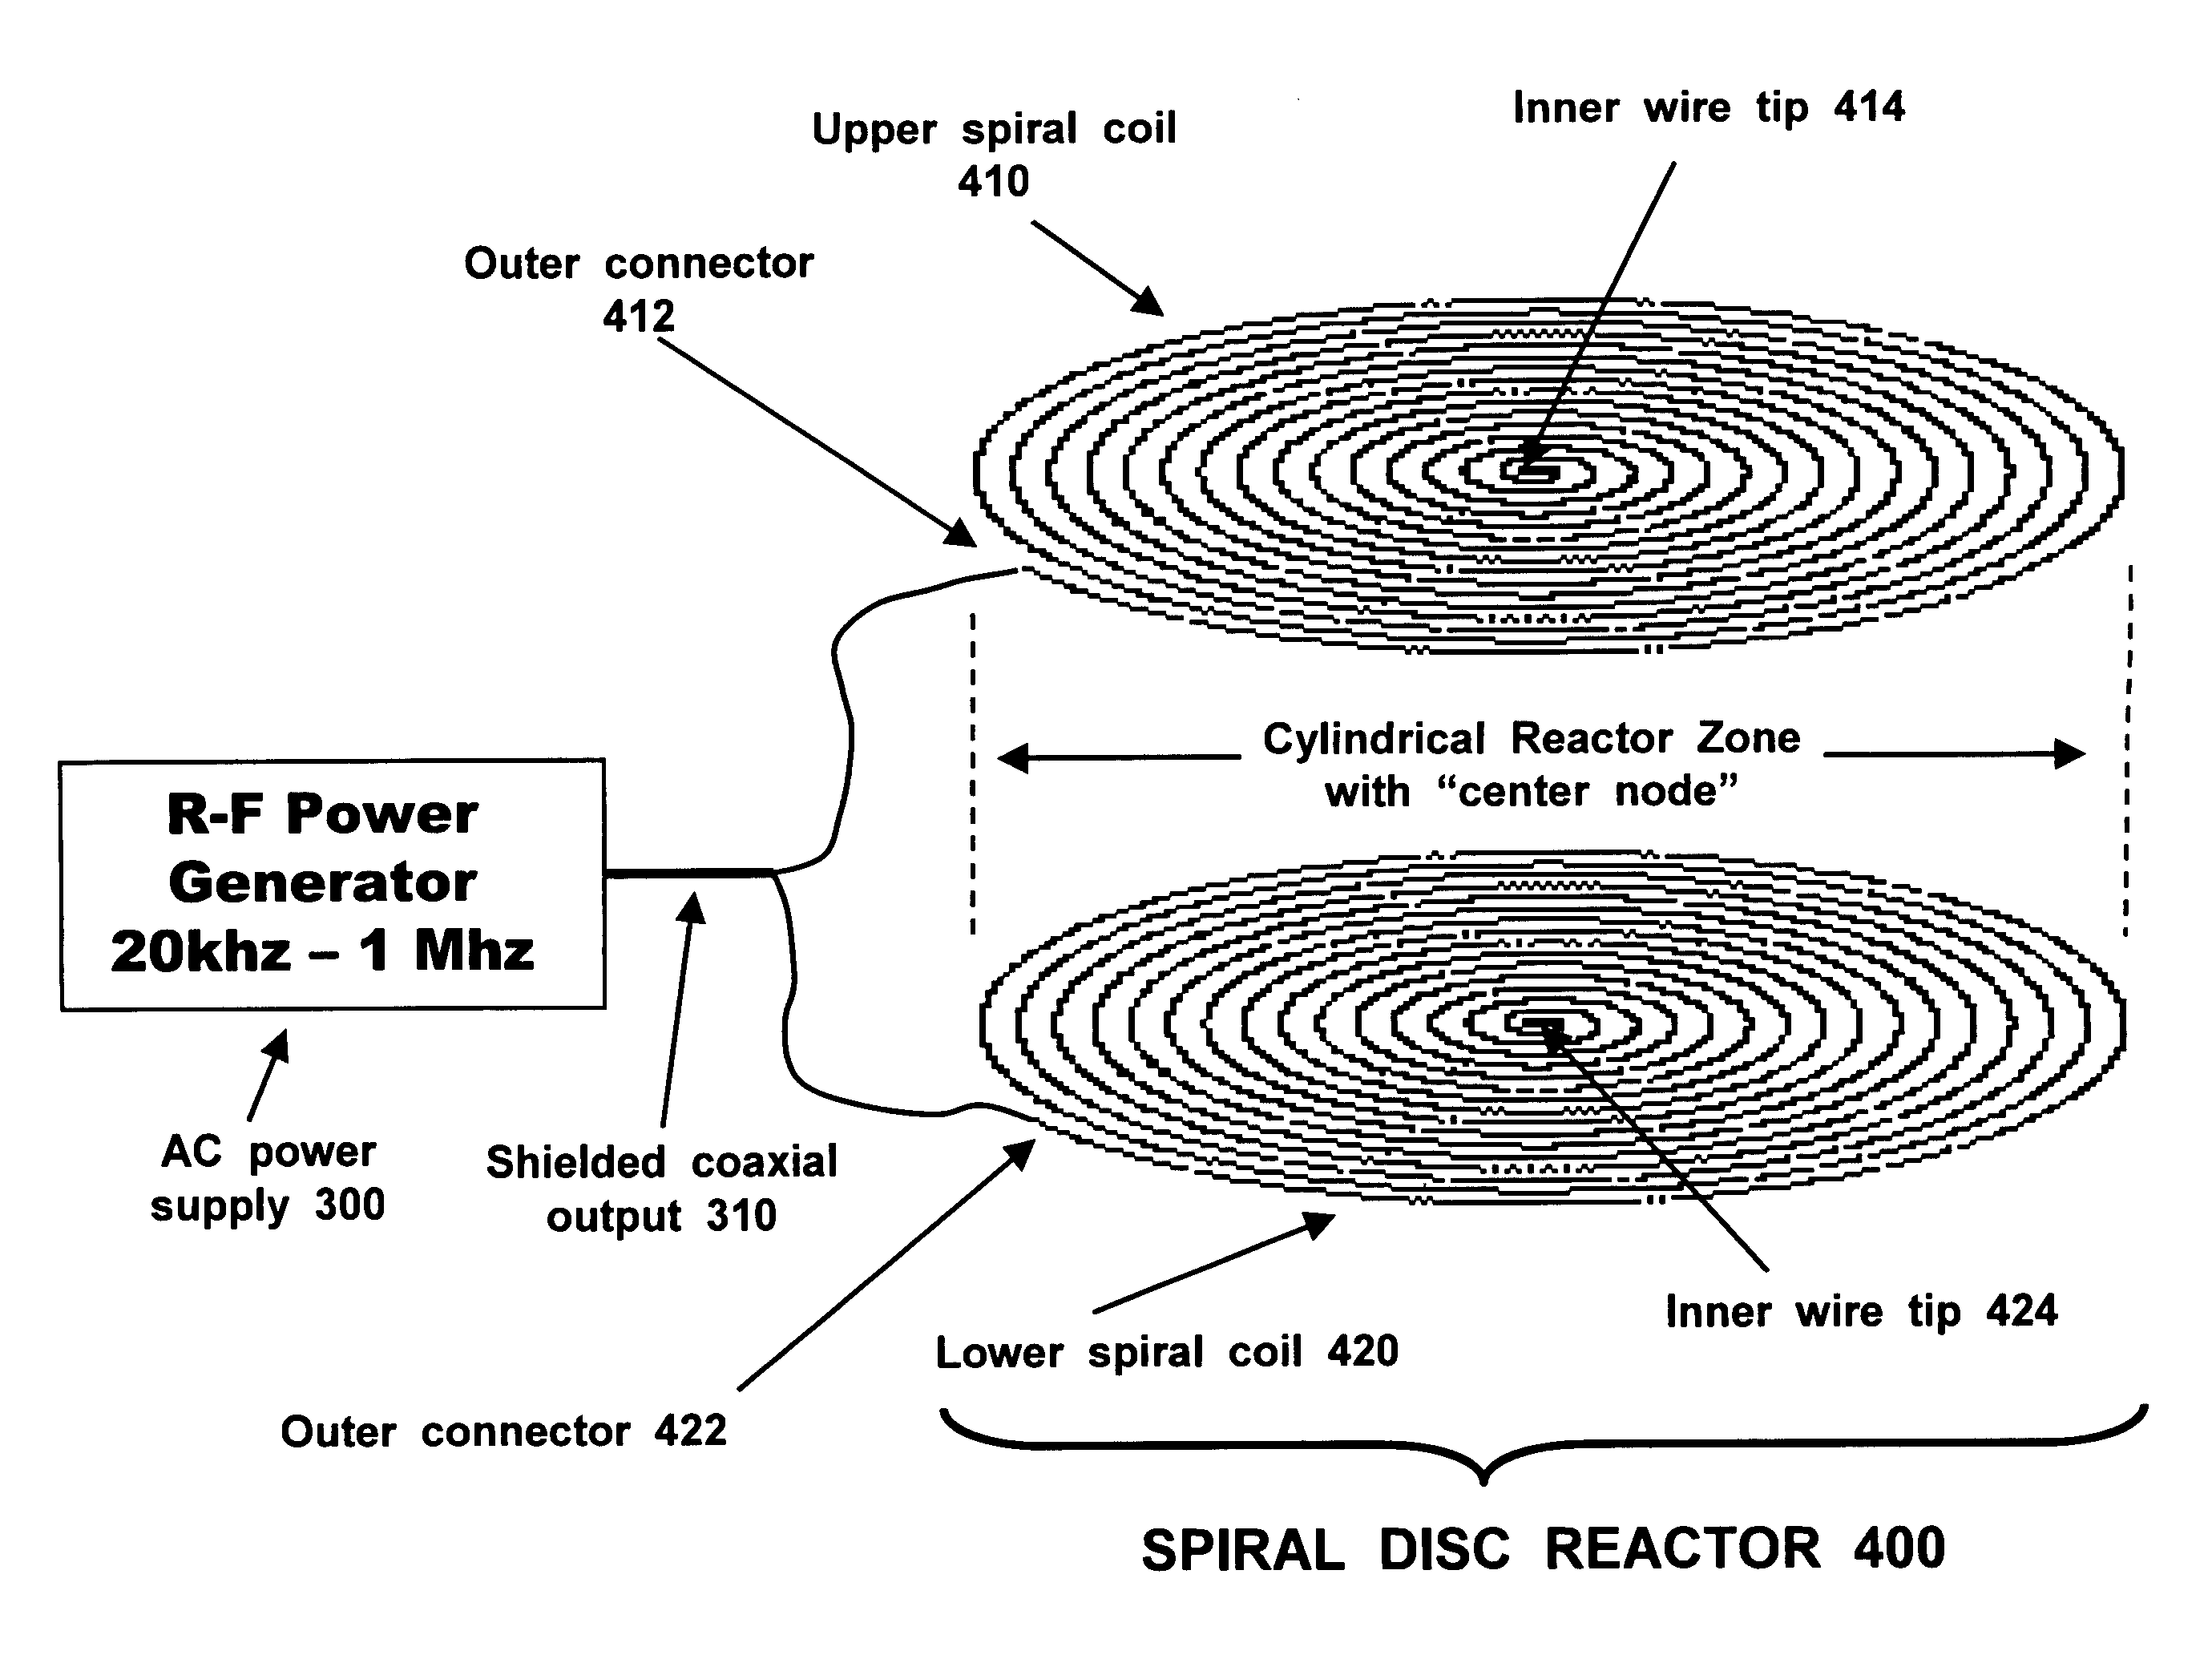 Electromagnetic systems with double-resonant spiral coil components